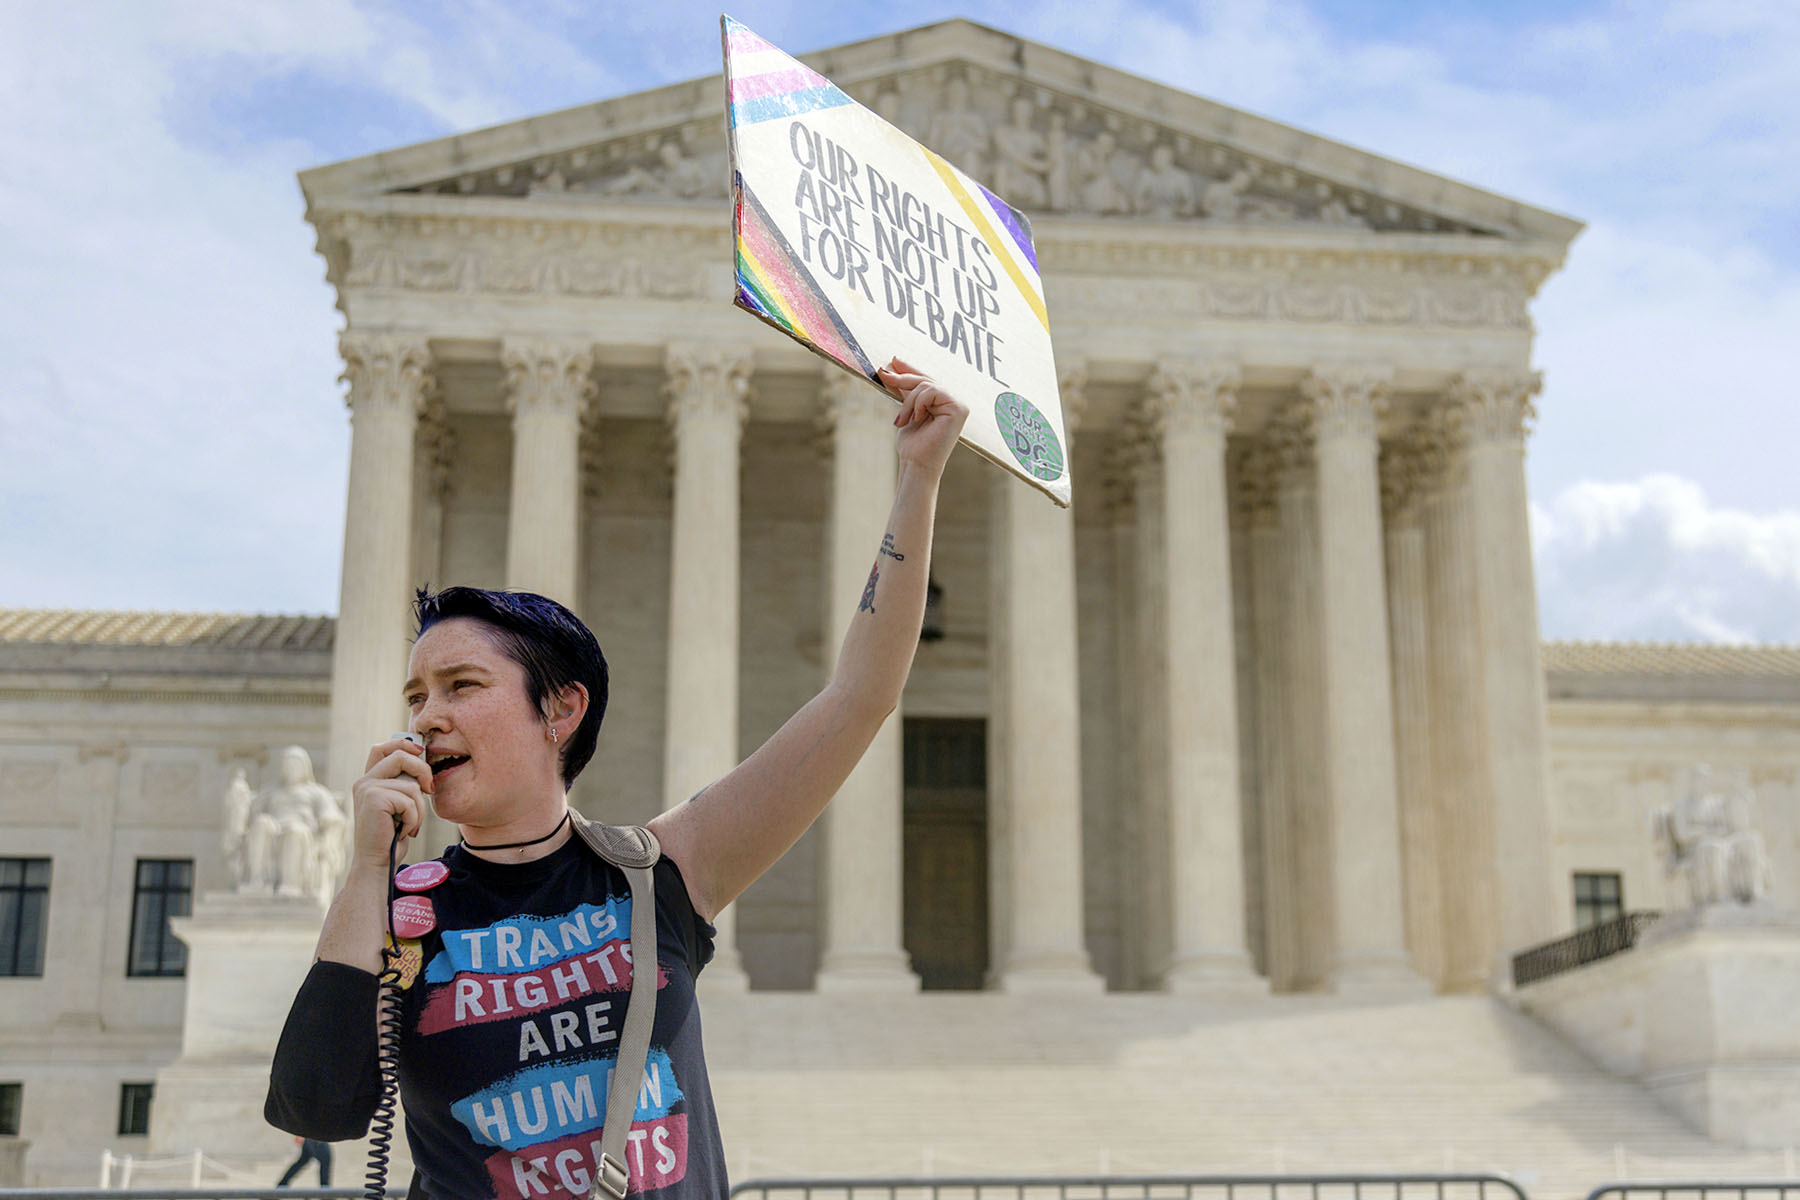 A demonstrator outside the Supreme Court in Washington, D.C. wears a 